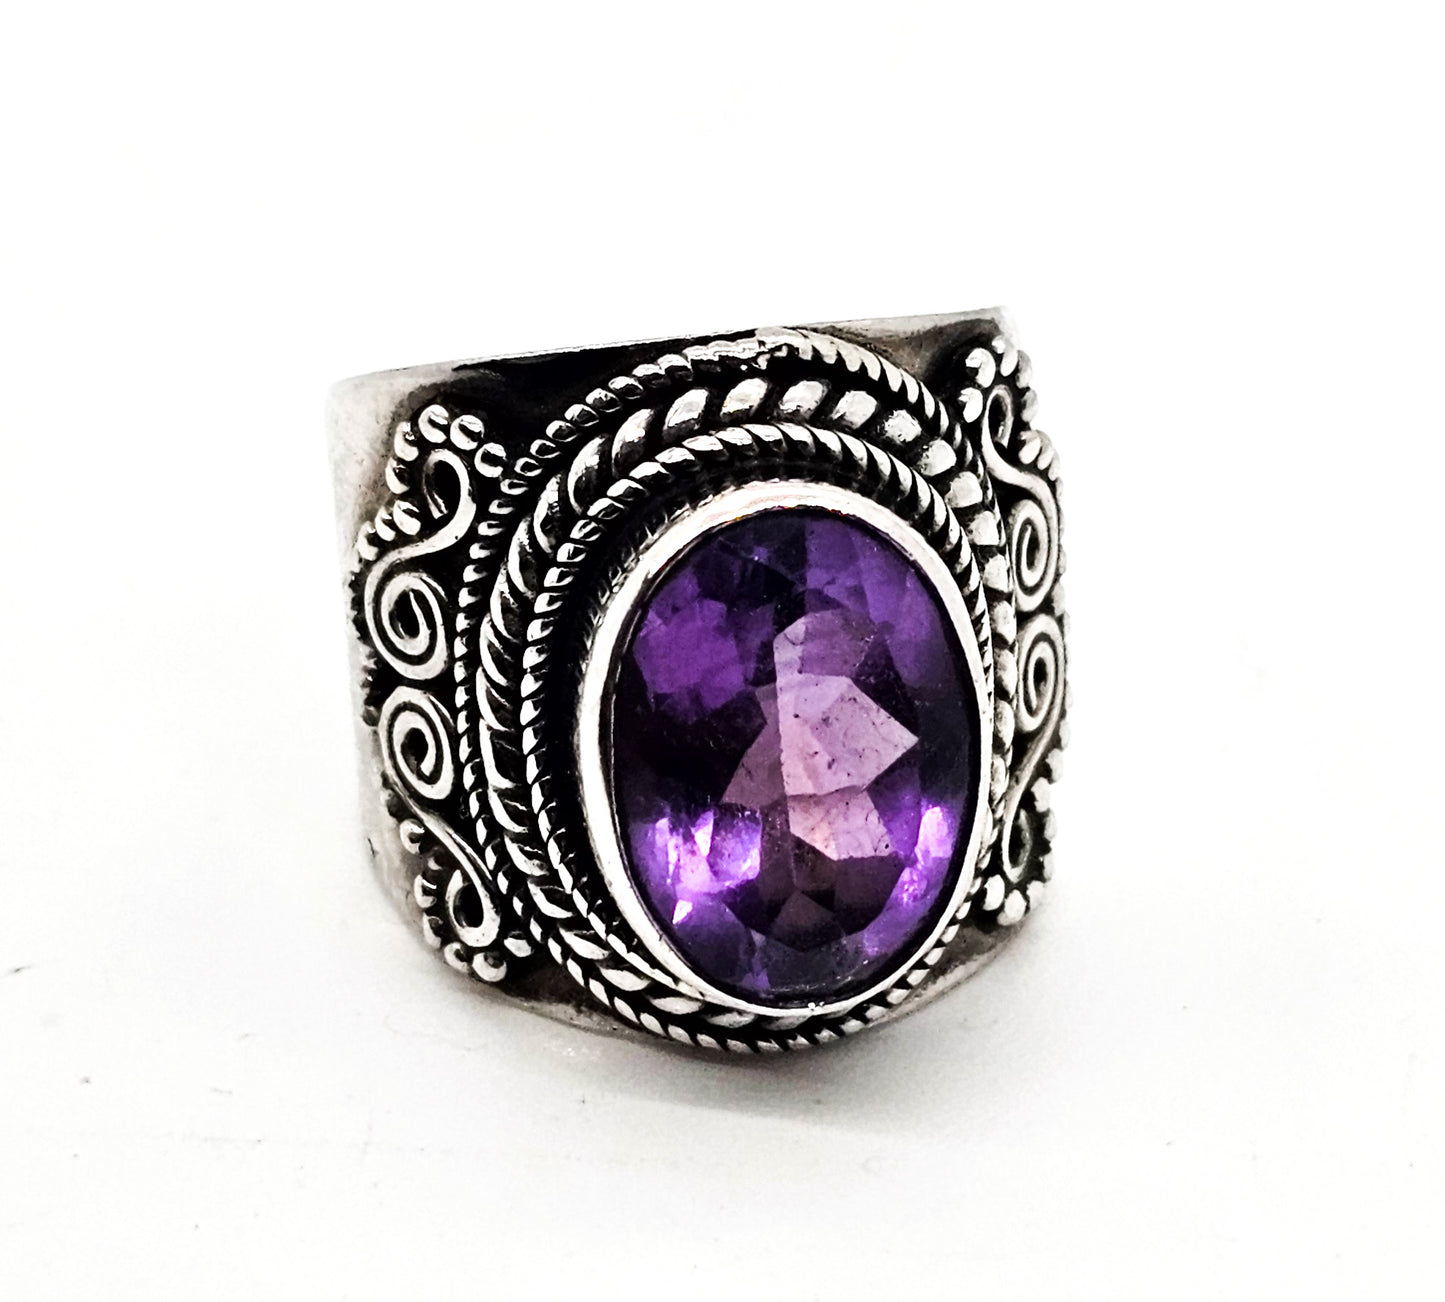 ID Balinese Amethyst purple gemstone large faceted Bali sterling silver ring size 9